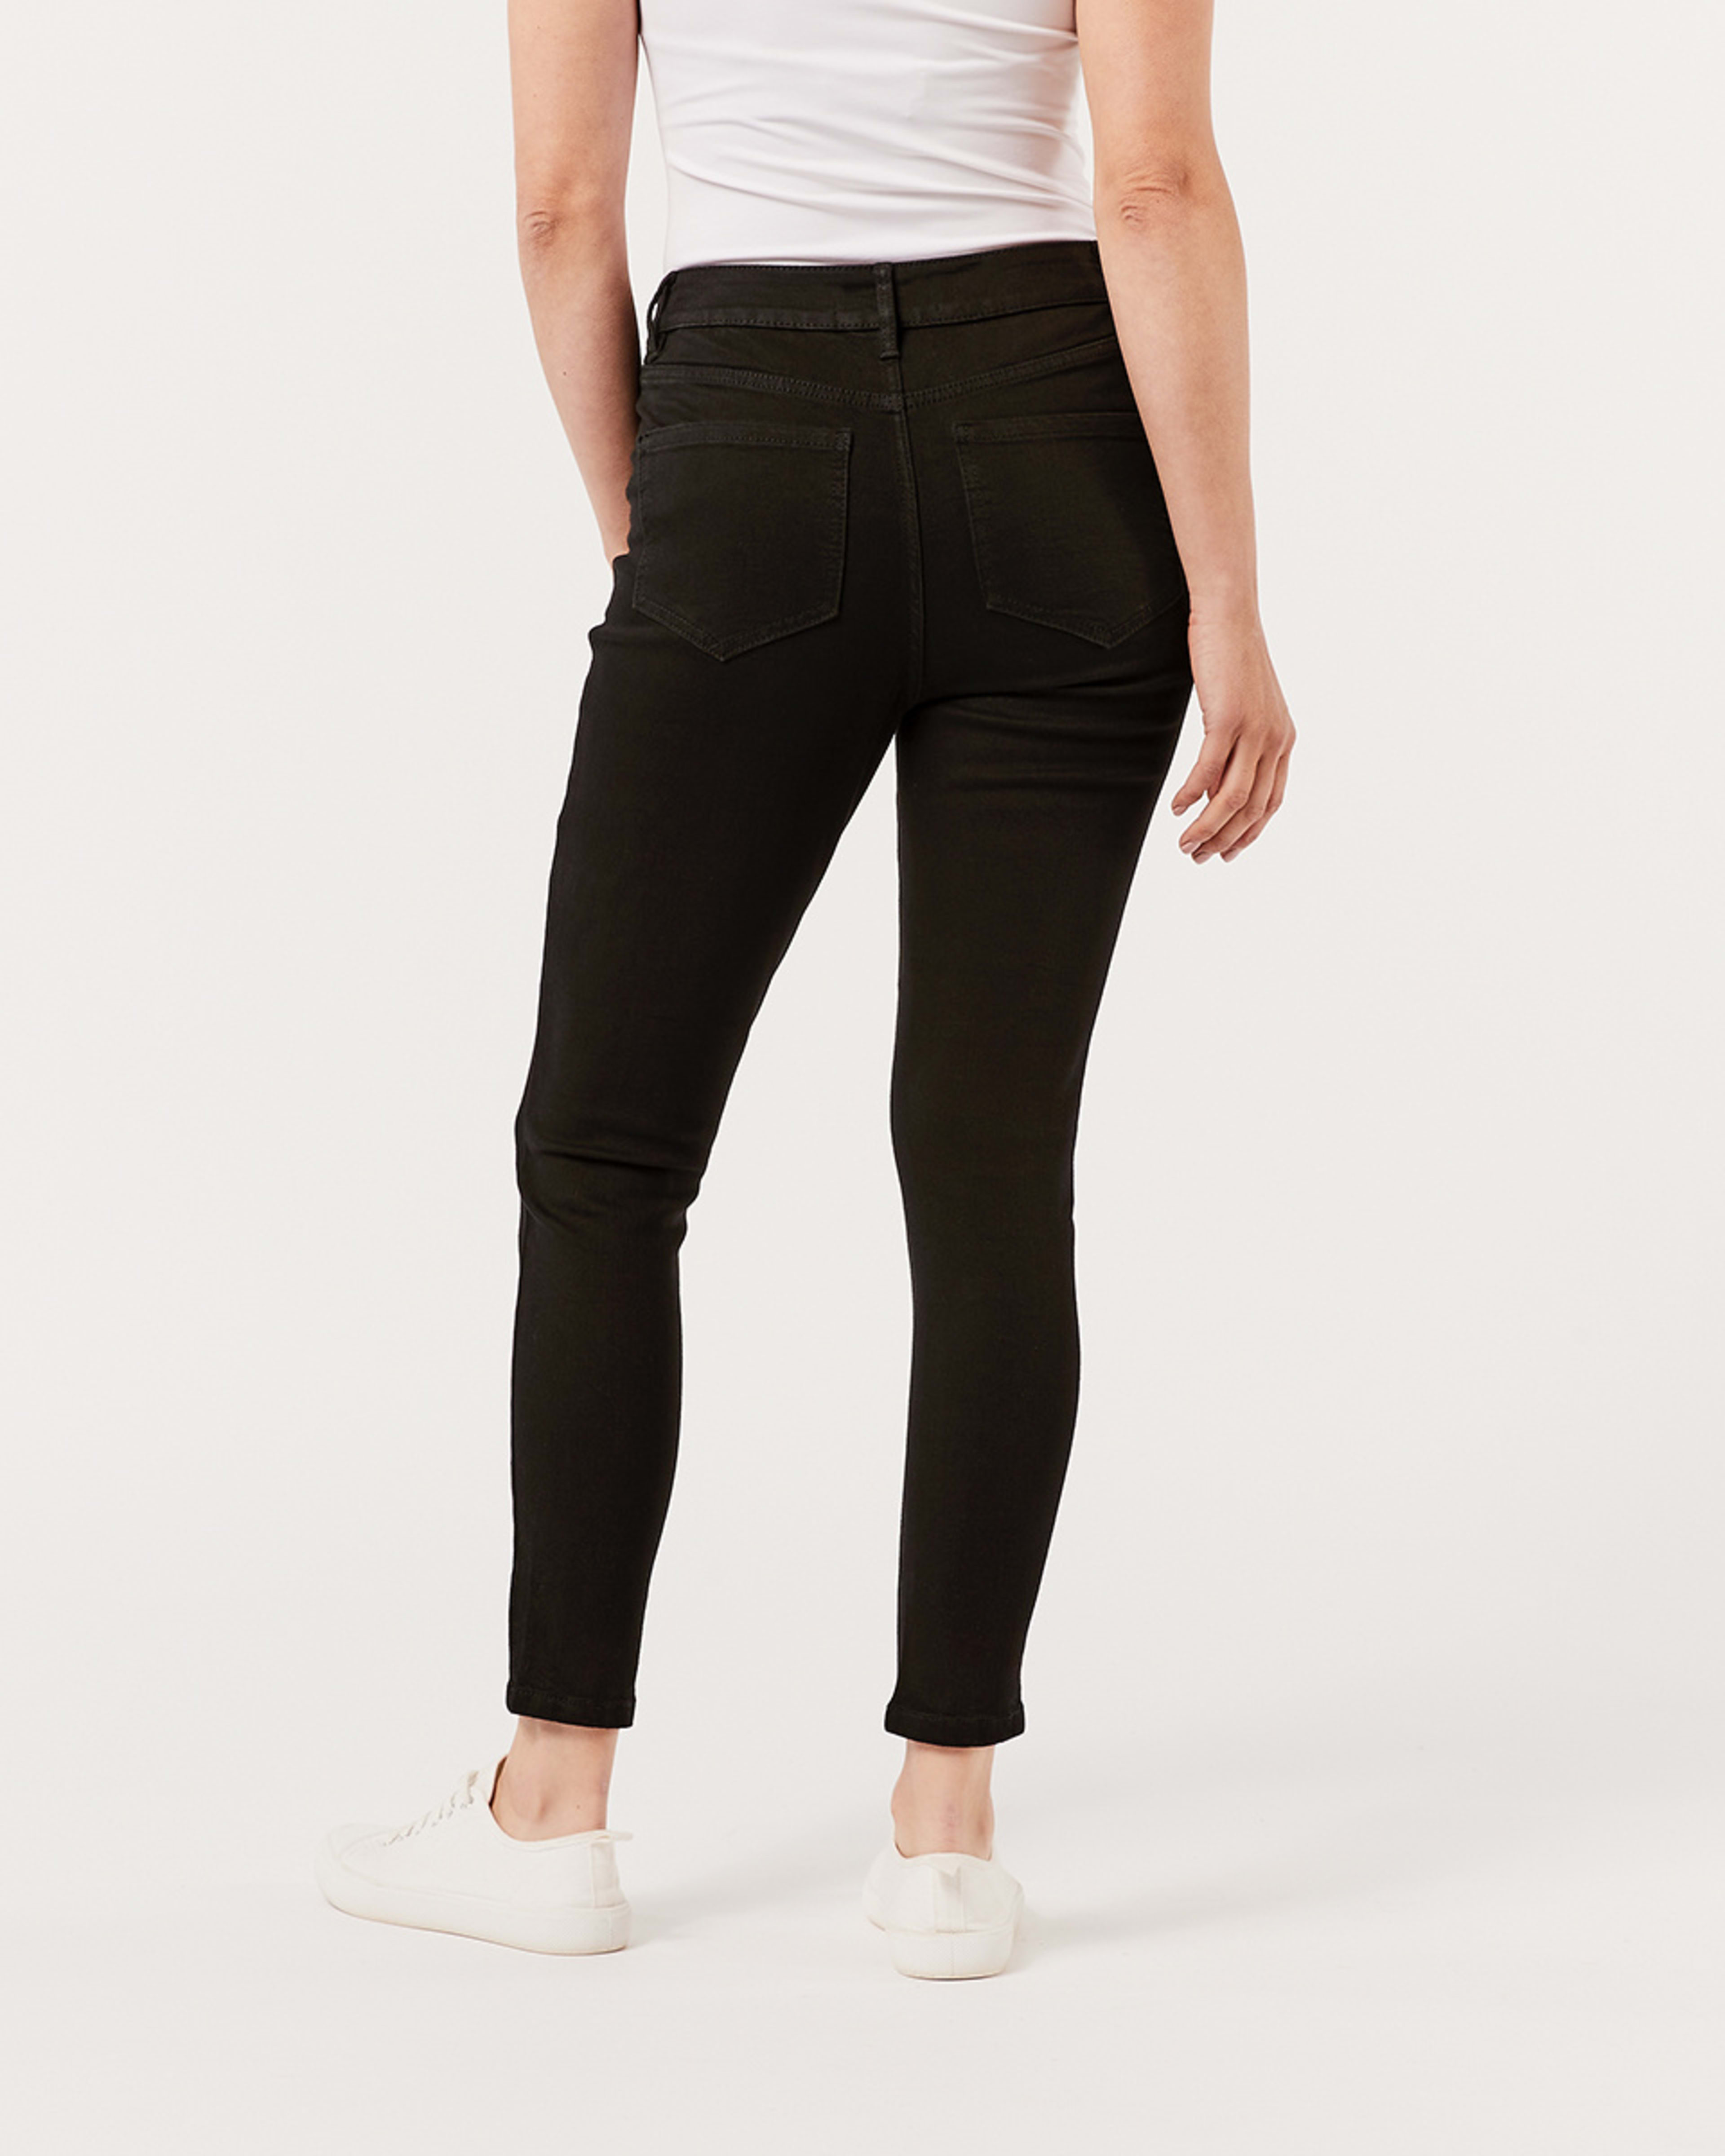 High Rise Ankle Length Skinny Jeans - Kmart NZ